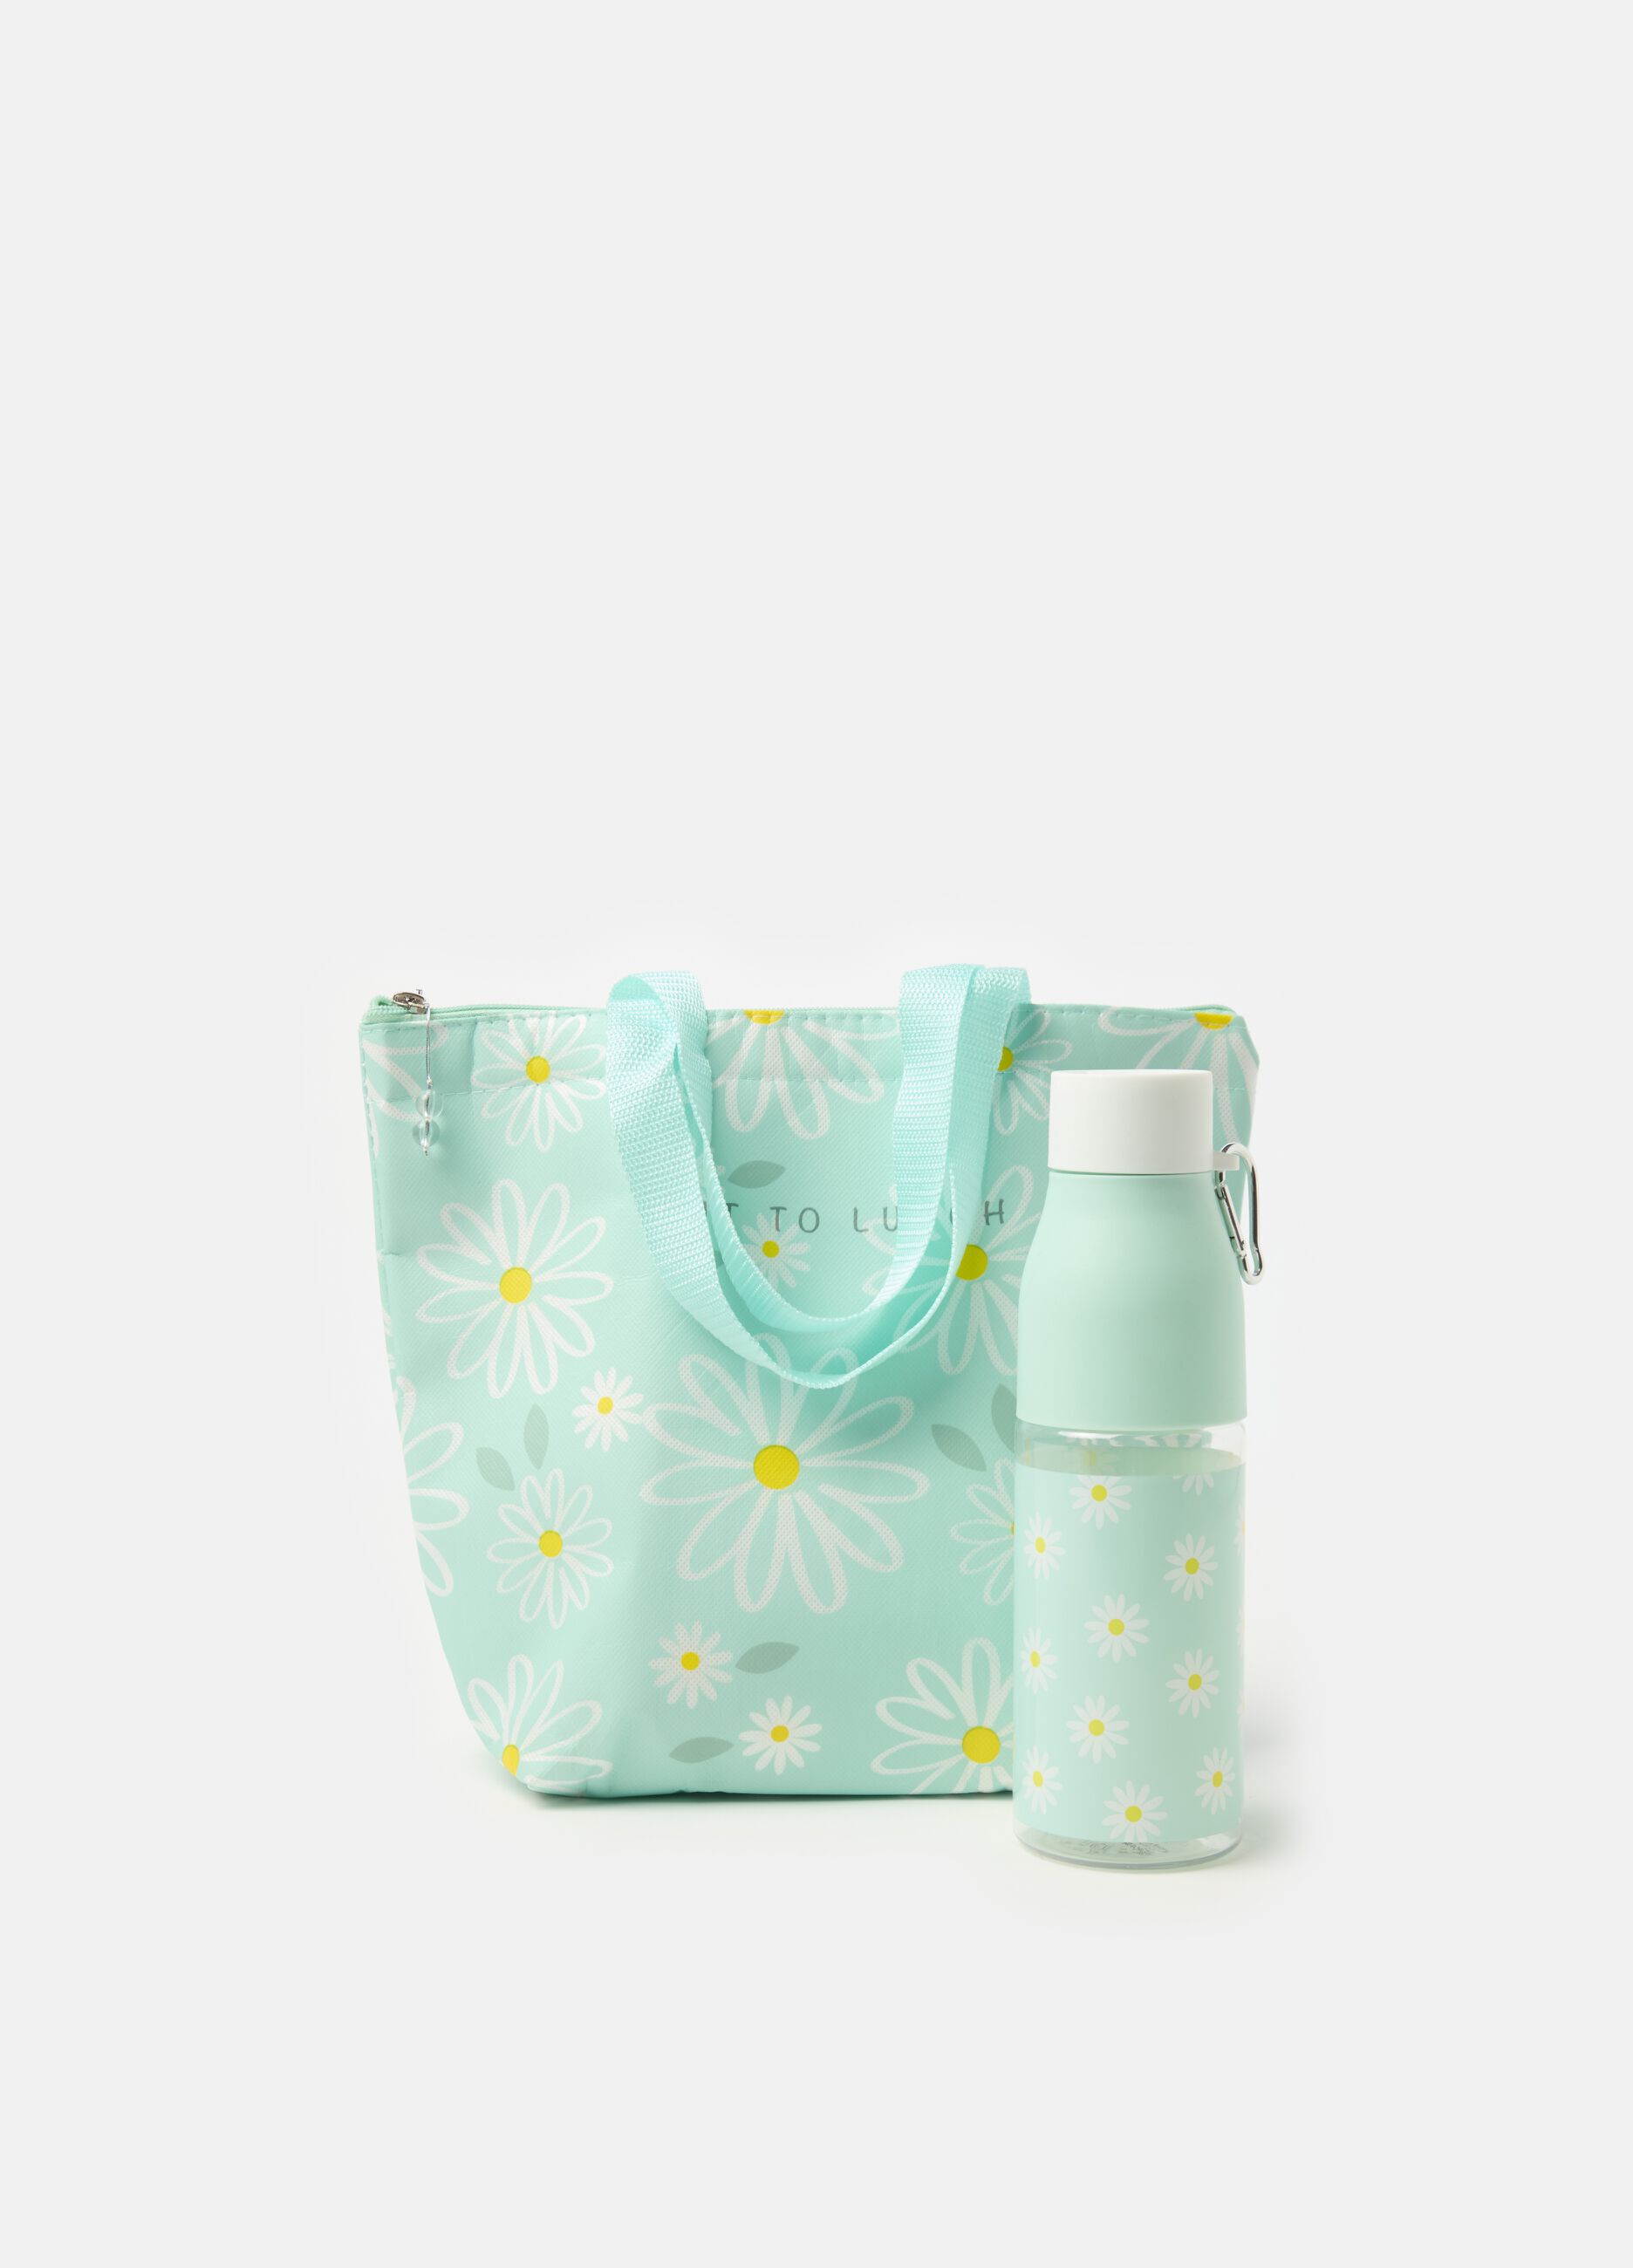 Lunch tote bag with water bottle